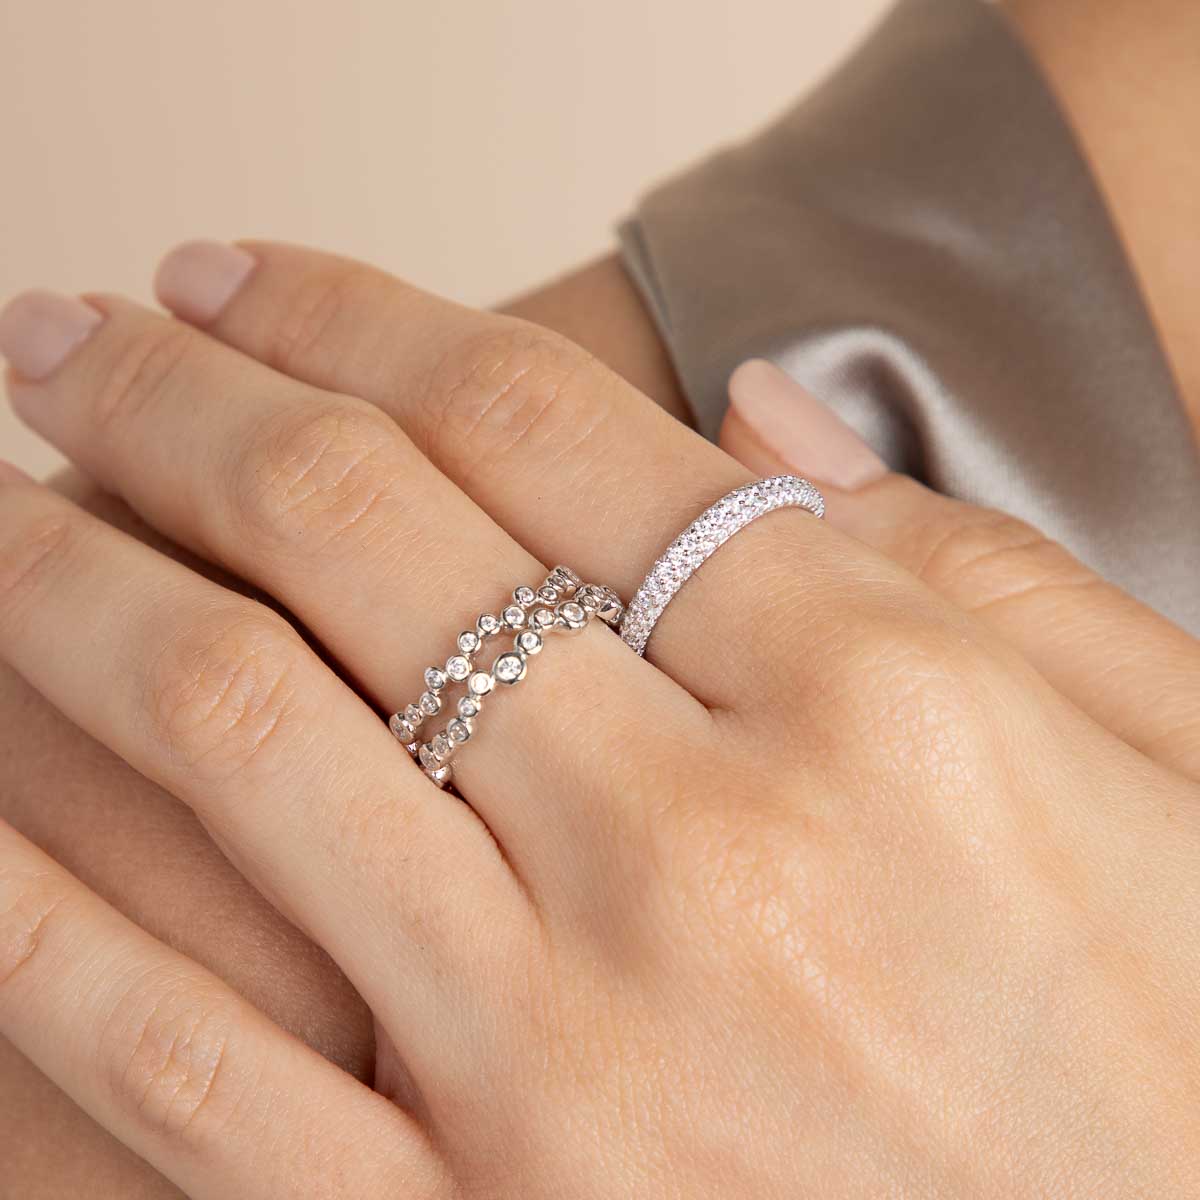 Gleam Crystal Band Ring in Silver